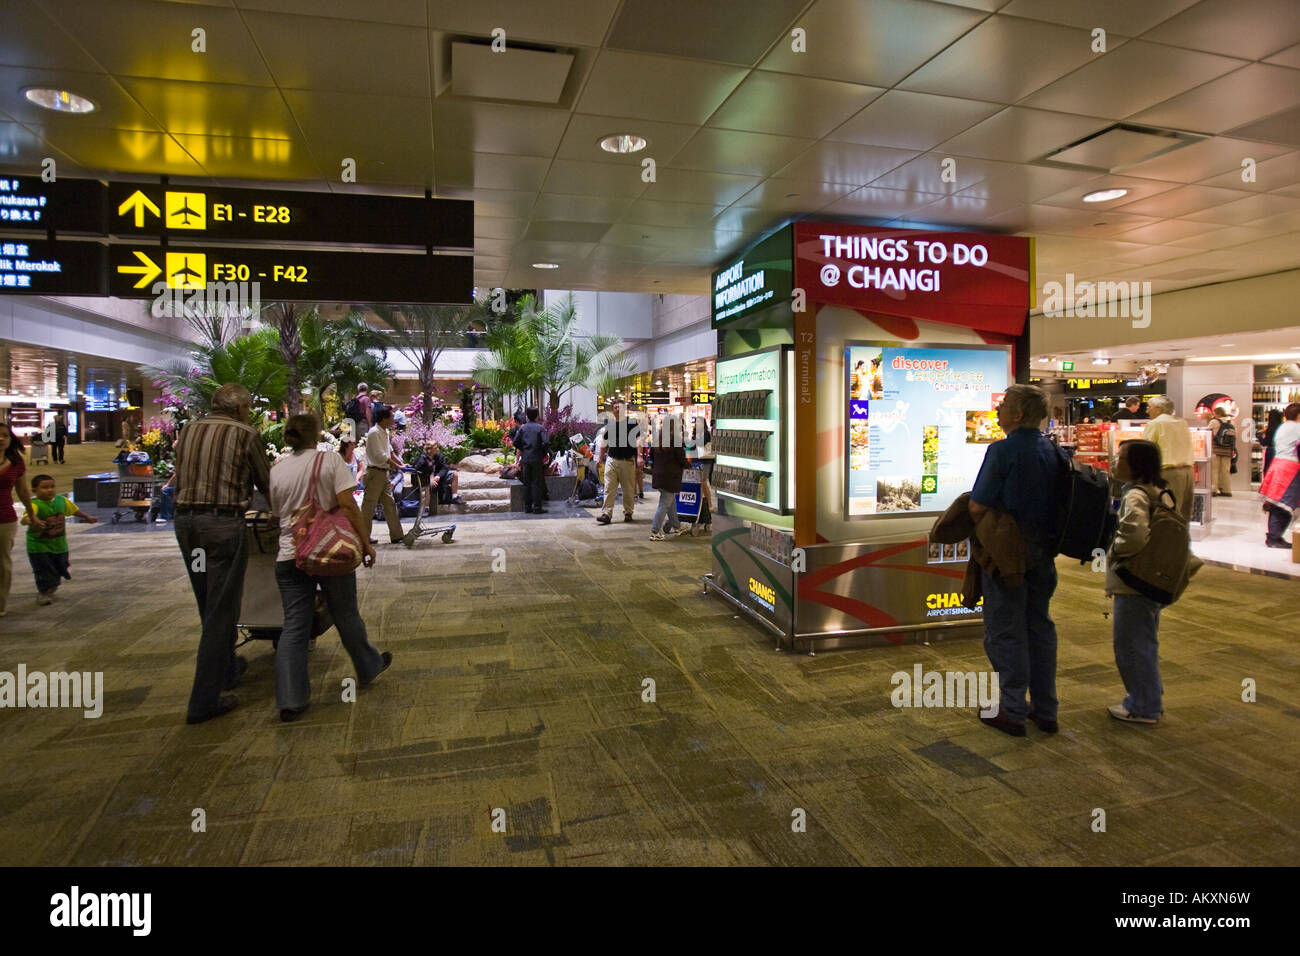 Changi airport with the Duty Free shops in Singapore, Indonesia. Stock Photo